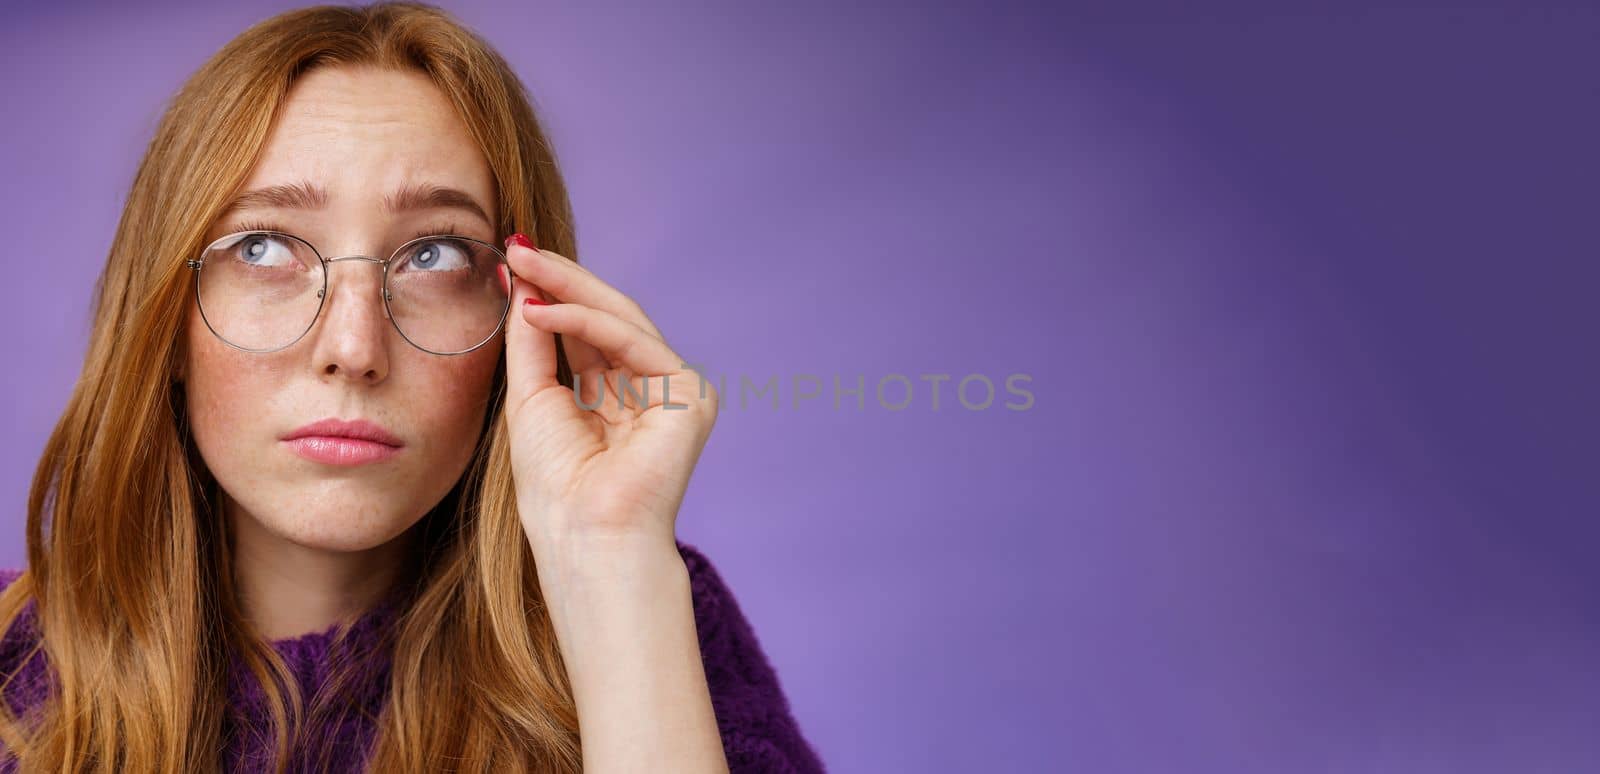 Lifestyle. Clumsy and cute young female teacher in glasses with red hair looking unsure and confused looking interested at upper left corner touching rim of glasses thinking or picturing in imagination.